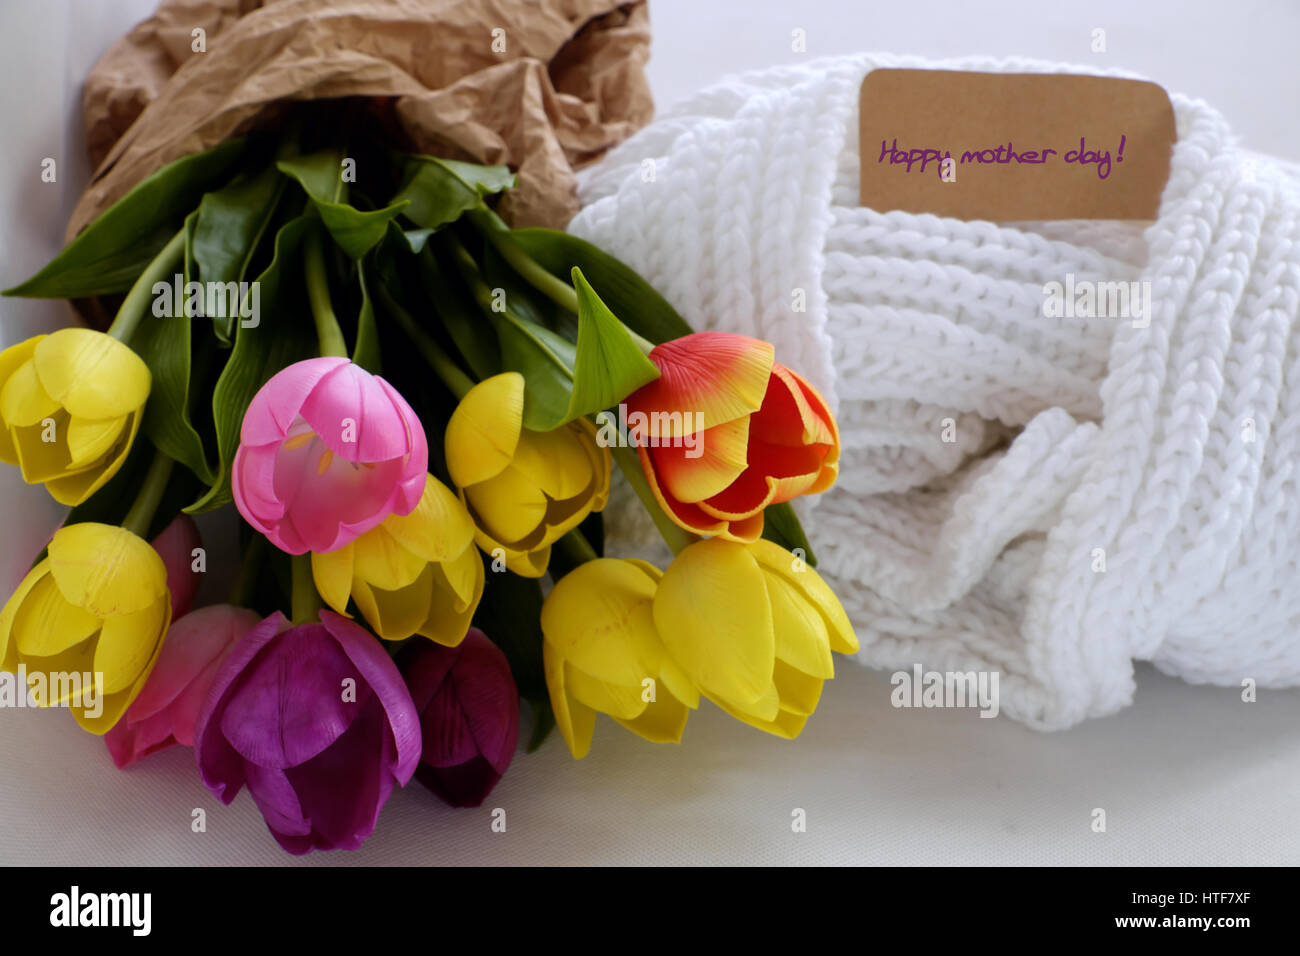 Happy mother day, meaningful handmade gift with knitted white scarf, tulip flower bouquet from clay, gratitude and thank mom for love in special day Stock Photo